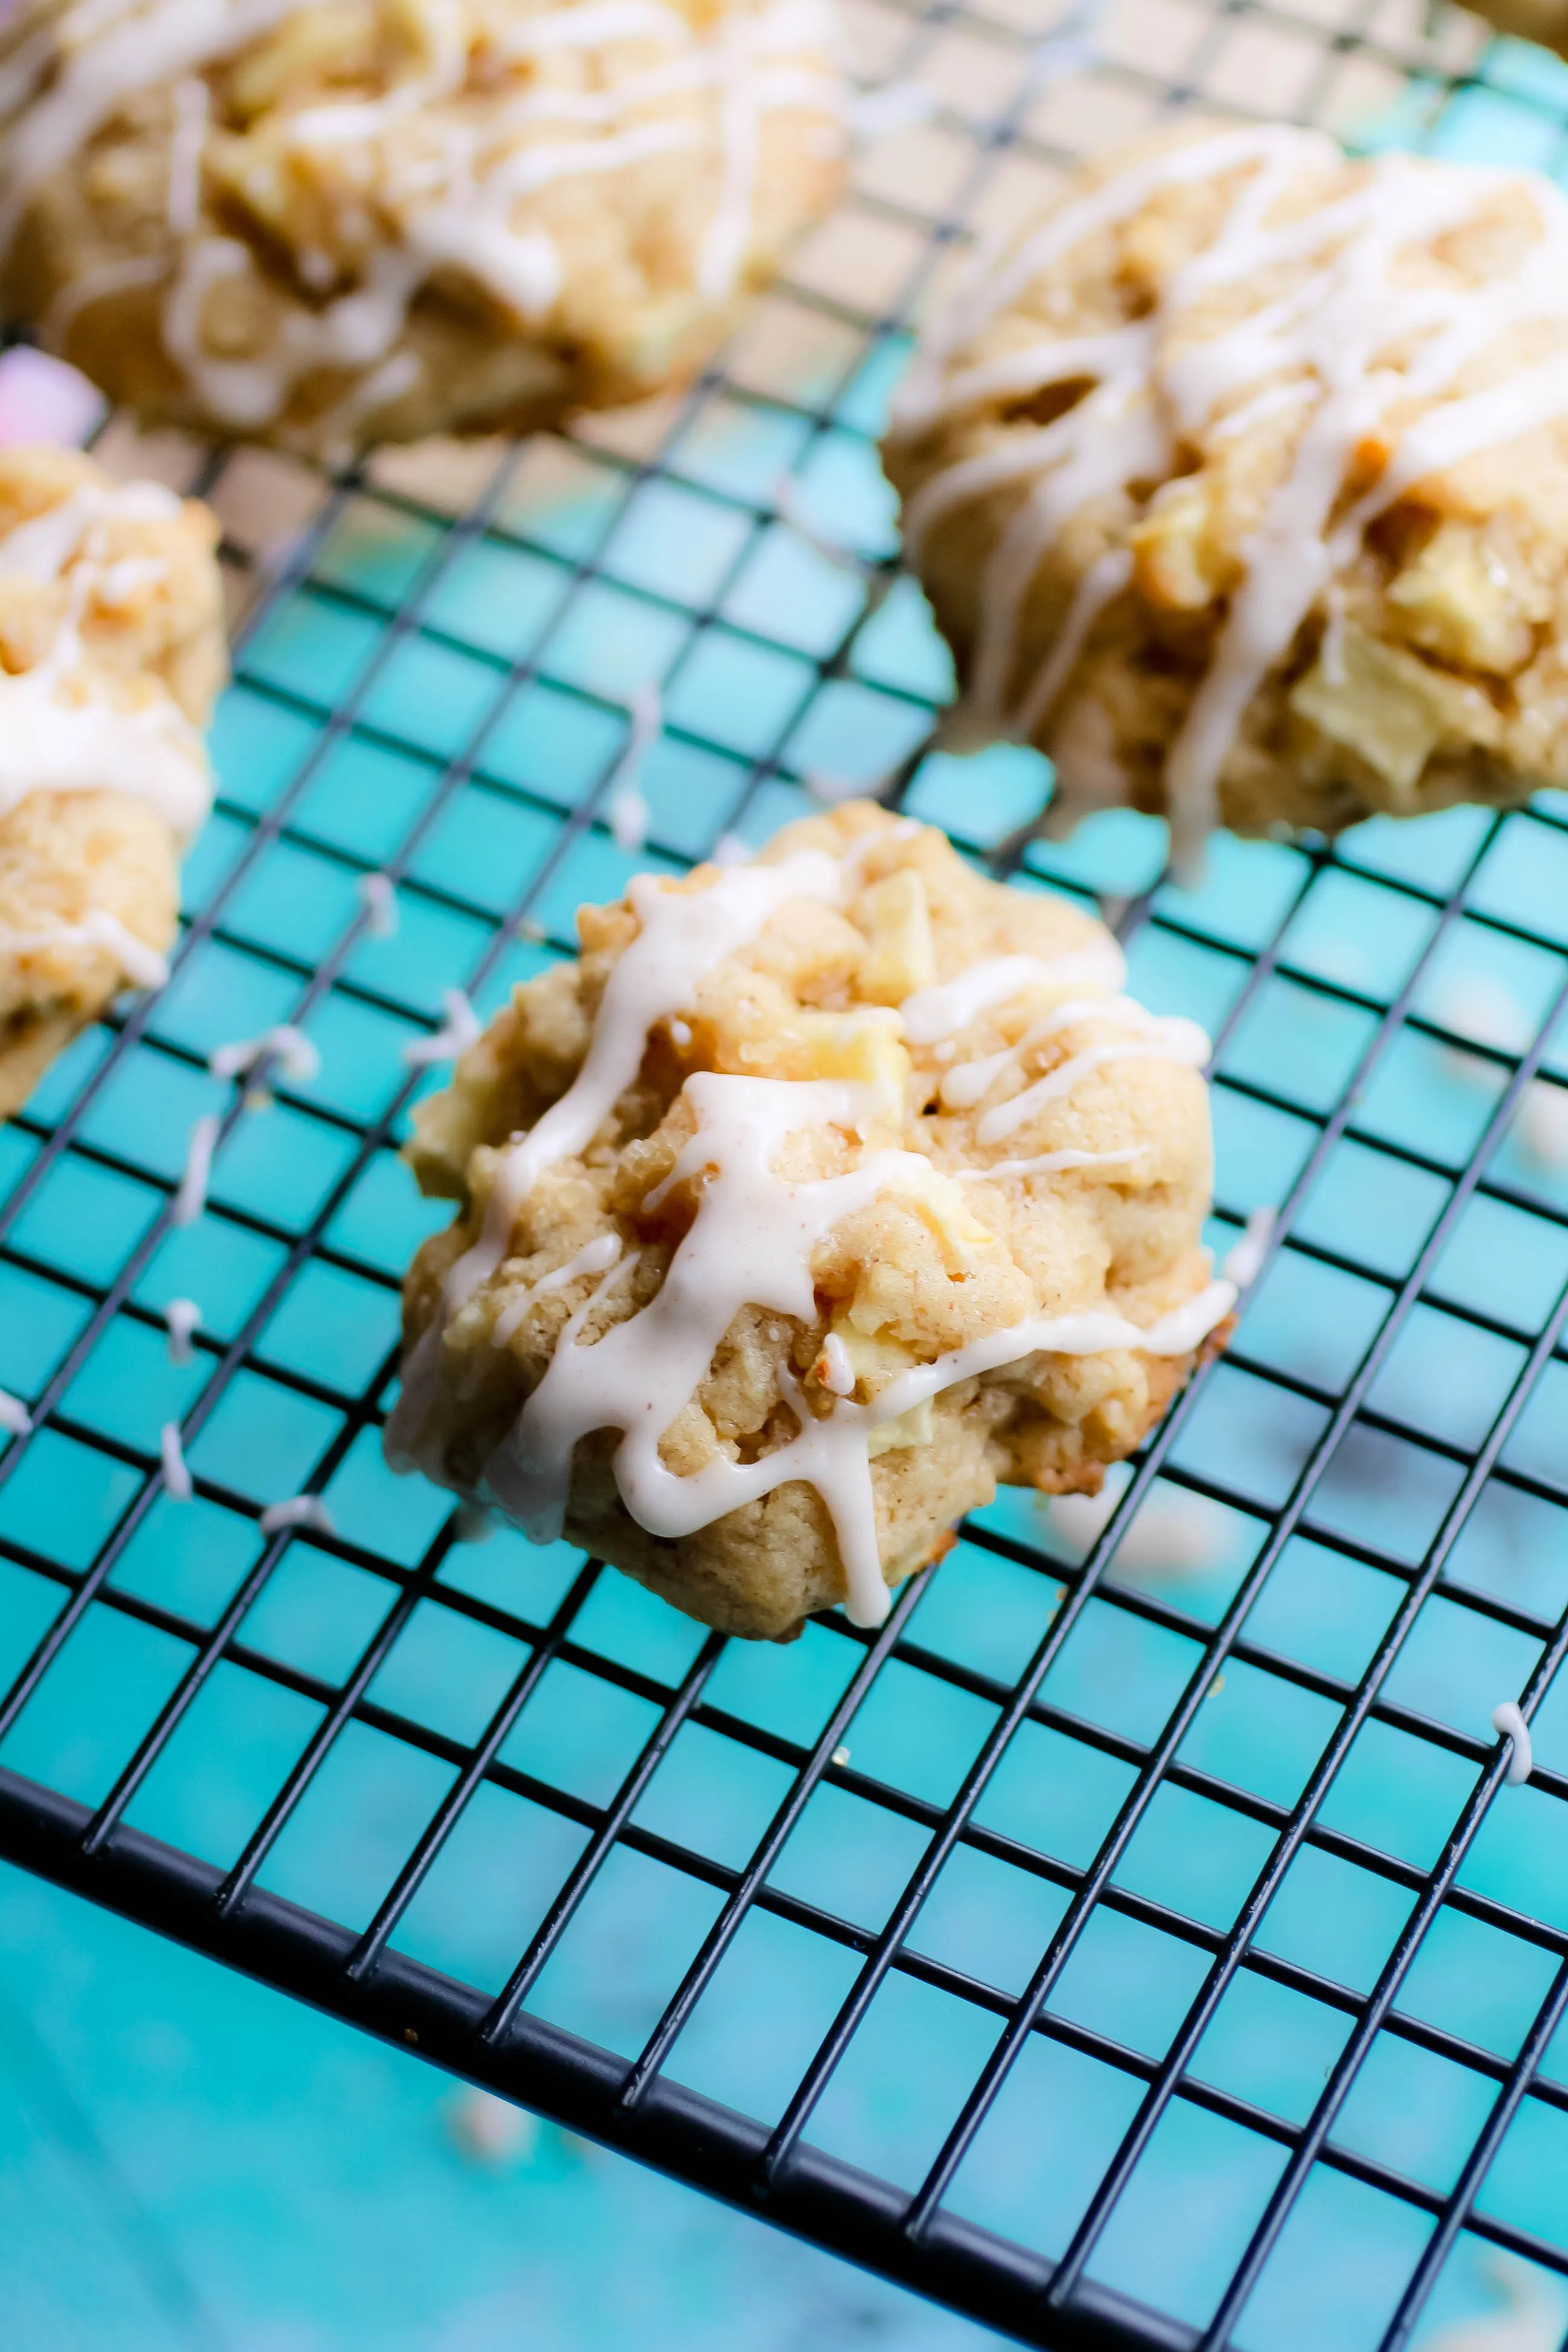 Apple Pie Cookies with Cinnamon Glaze are spiced like your favorite pie, in cookie format. Apple Pie Cookies with Cinnamon Glaze make tasty treats!